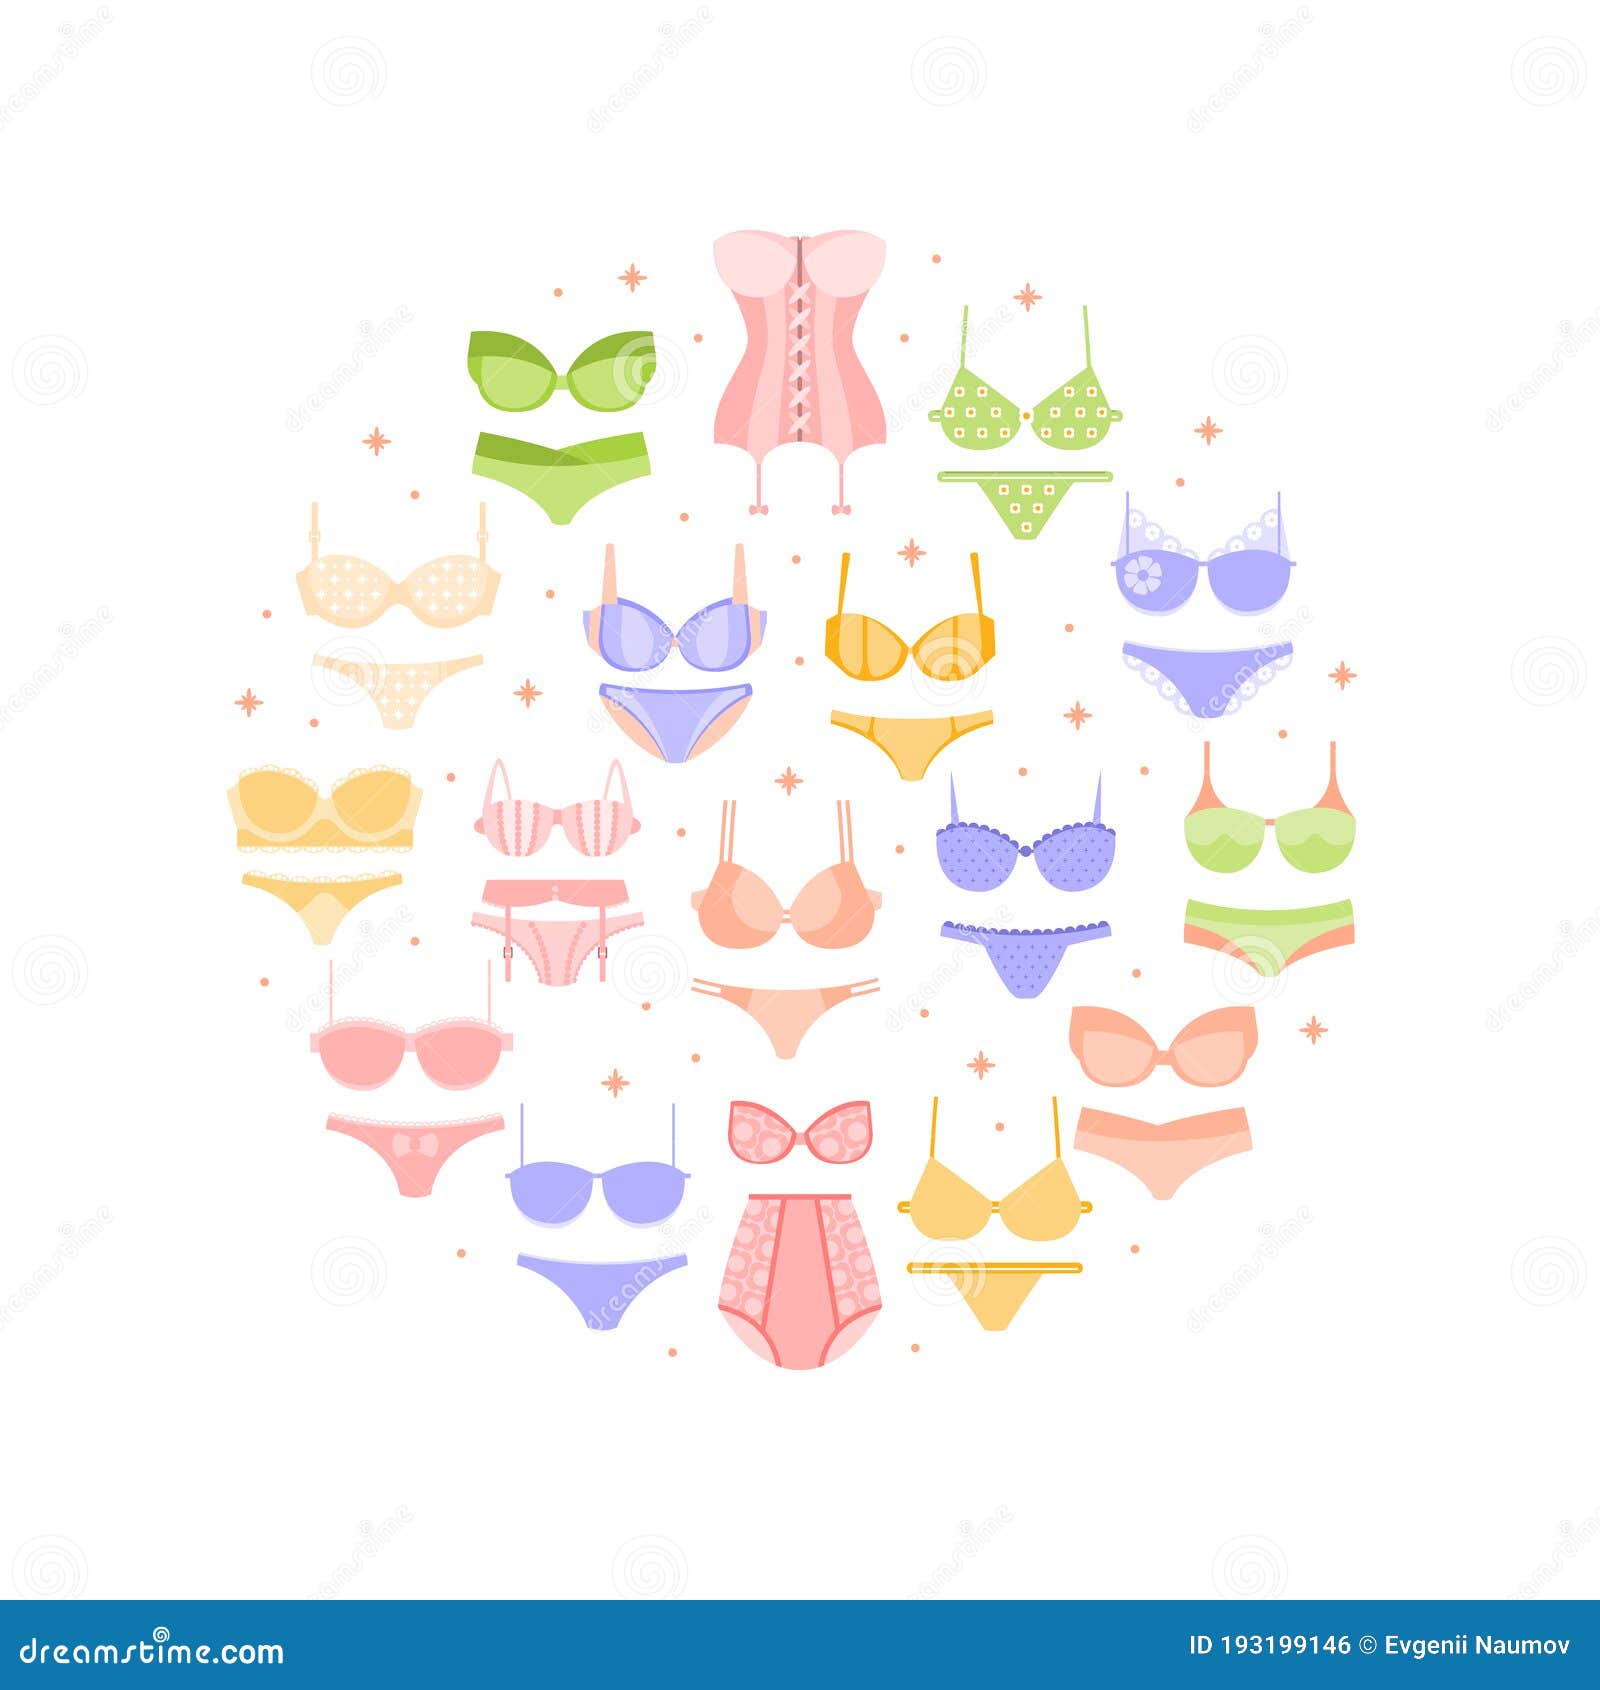 https://thumbs.dreamstime.com/z/lingerie-circle-poster-female-underwear-attributes-arranged-circle-shape-lingerie-circle-poster-female-underwear-193199146.jpg